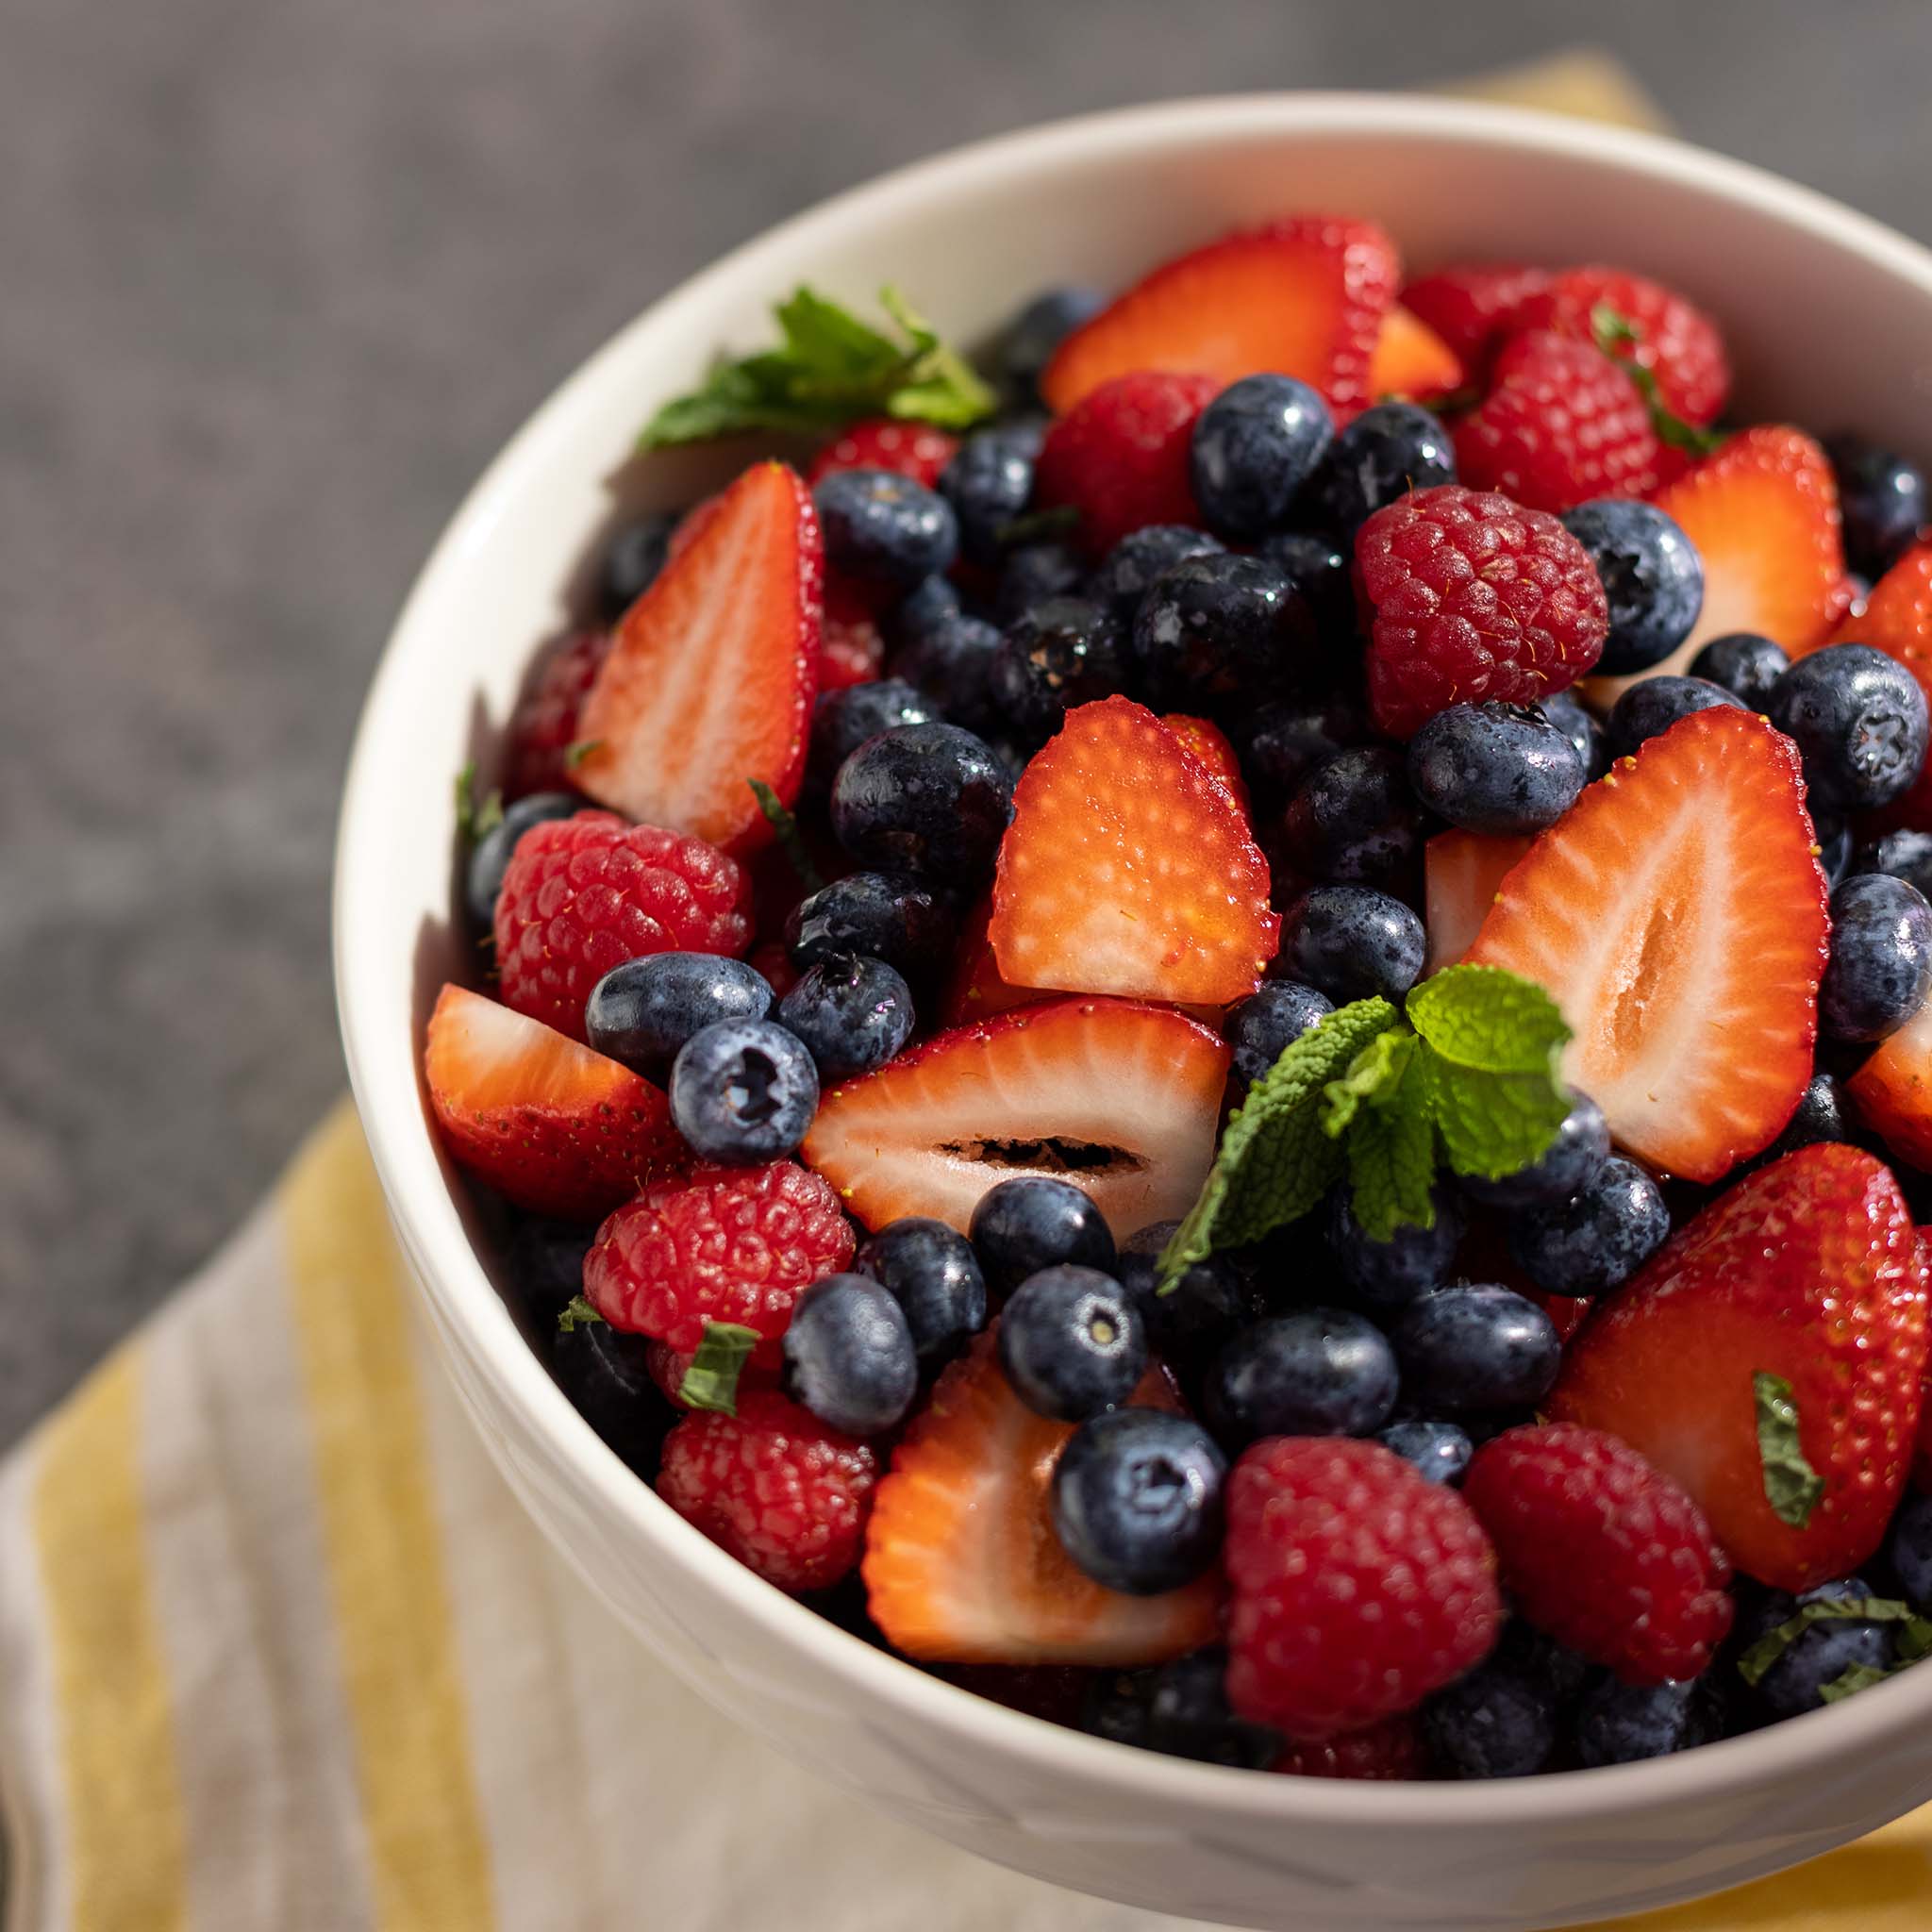 Joanna Gaines's Mixed Berry Salad